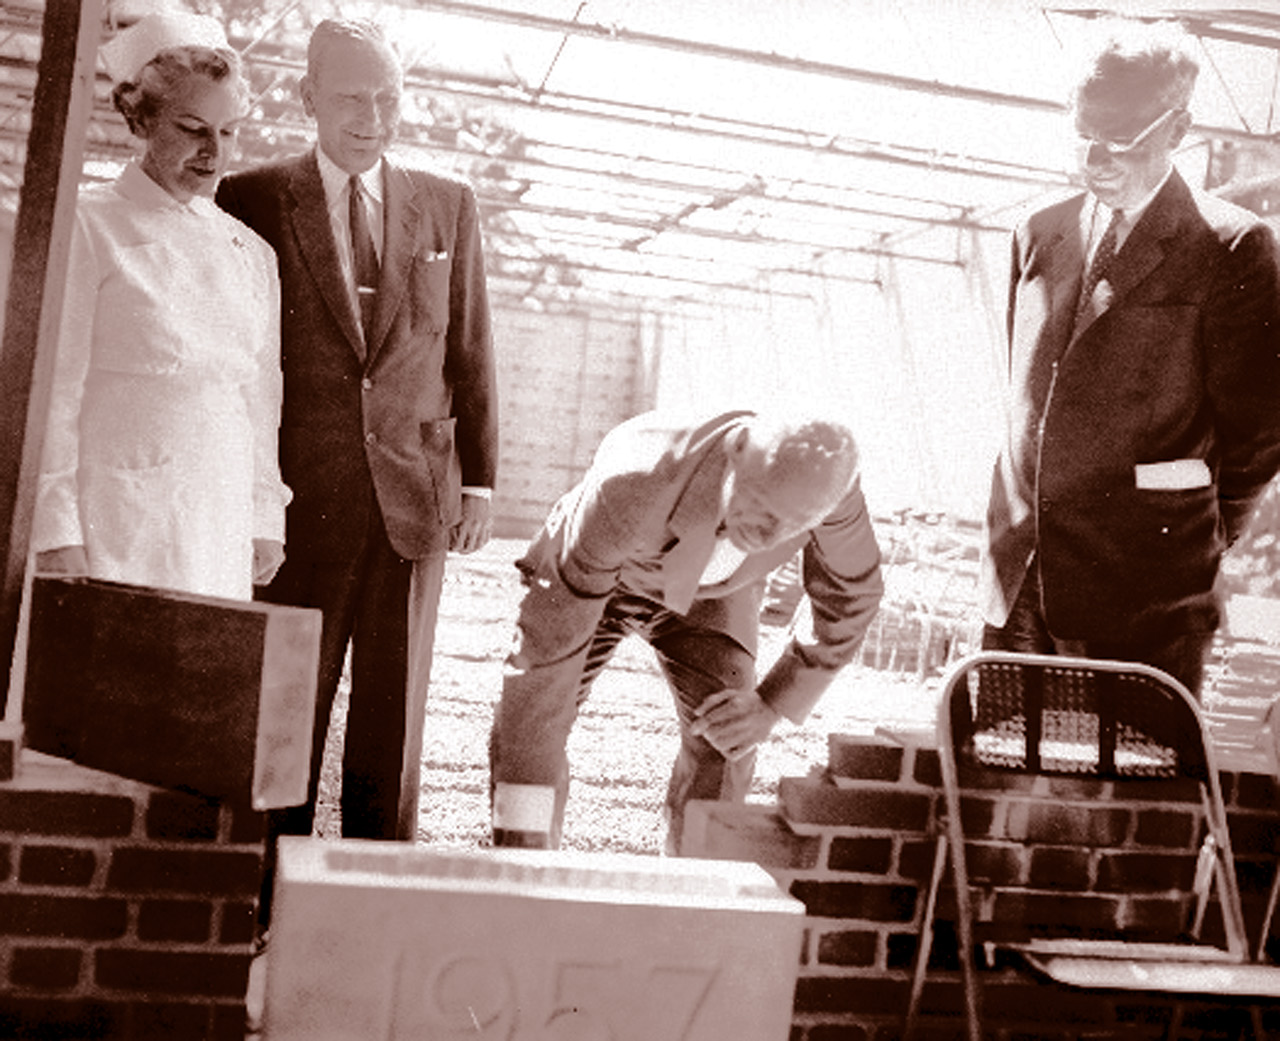 Walter S. Carpenter lays the cornerstone for Wilmington General Hospital in 1957